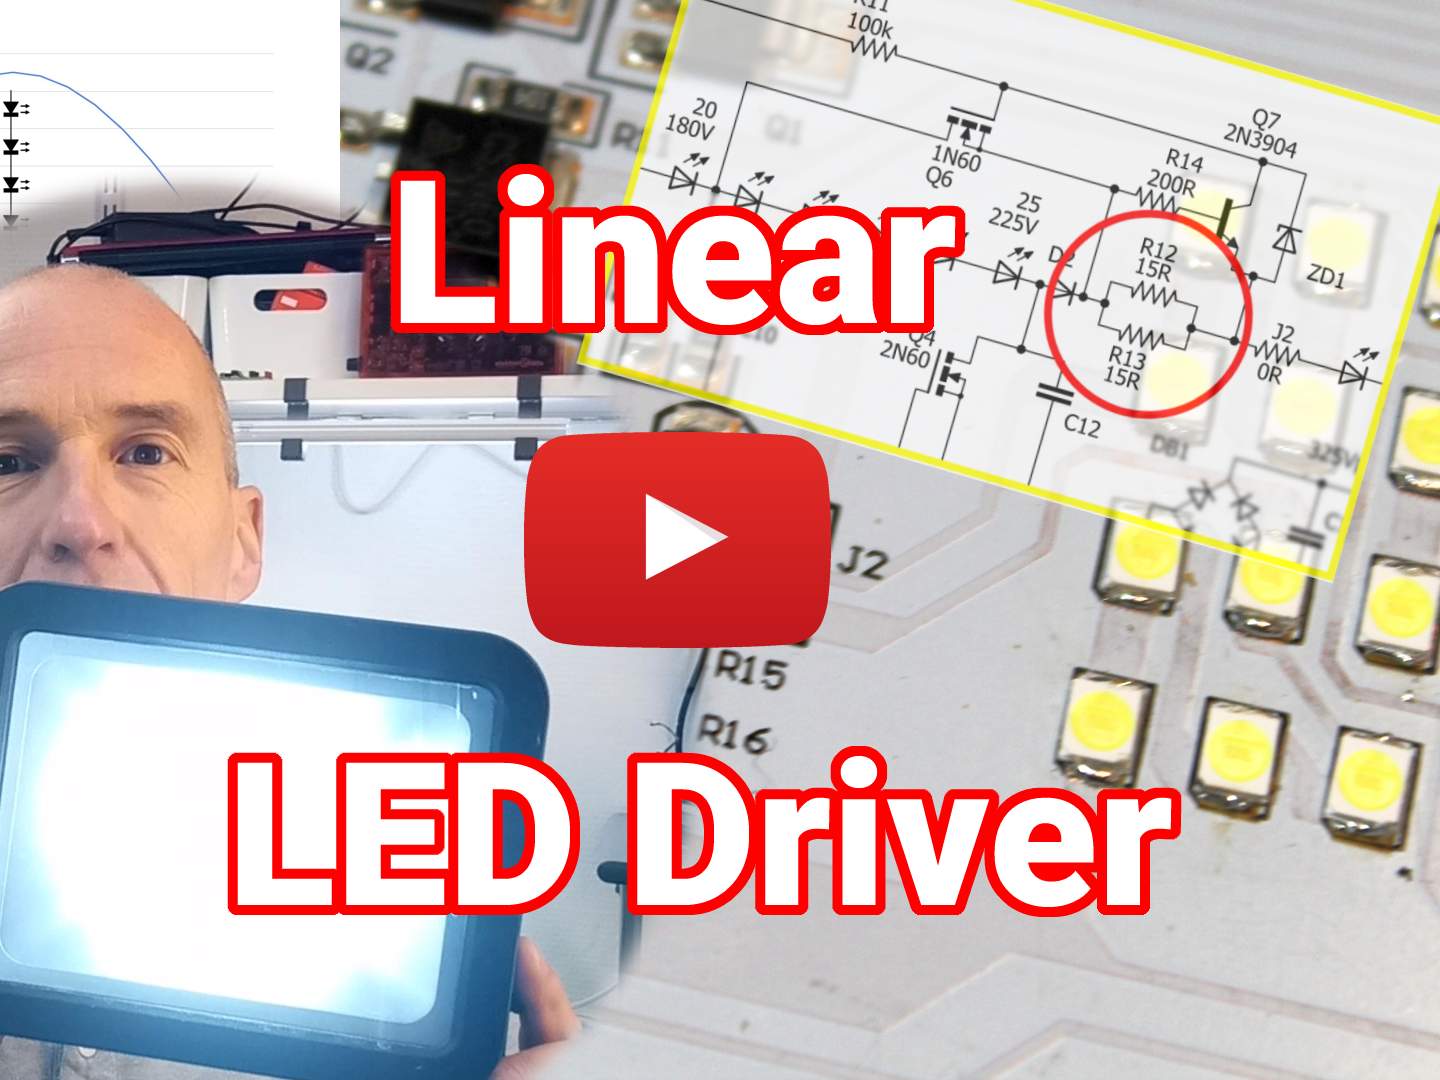 stang Advarsel velordnet Do You Know the Linear LED Driver? | Elektor Magazine